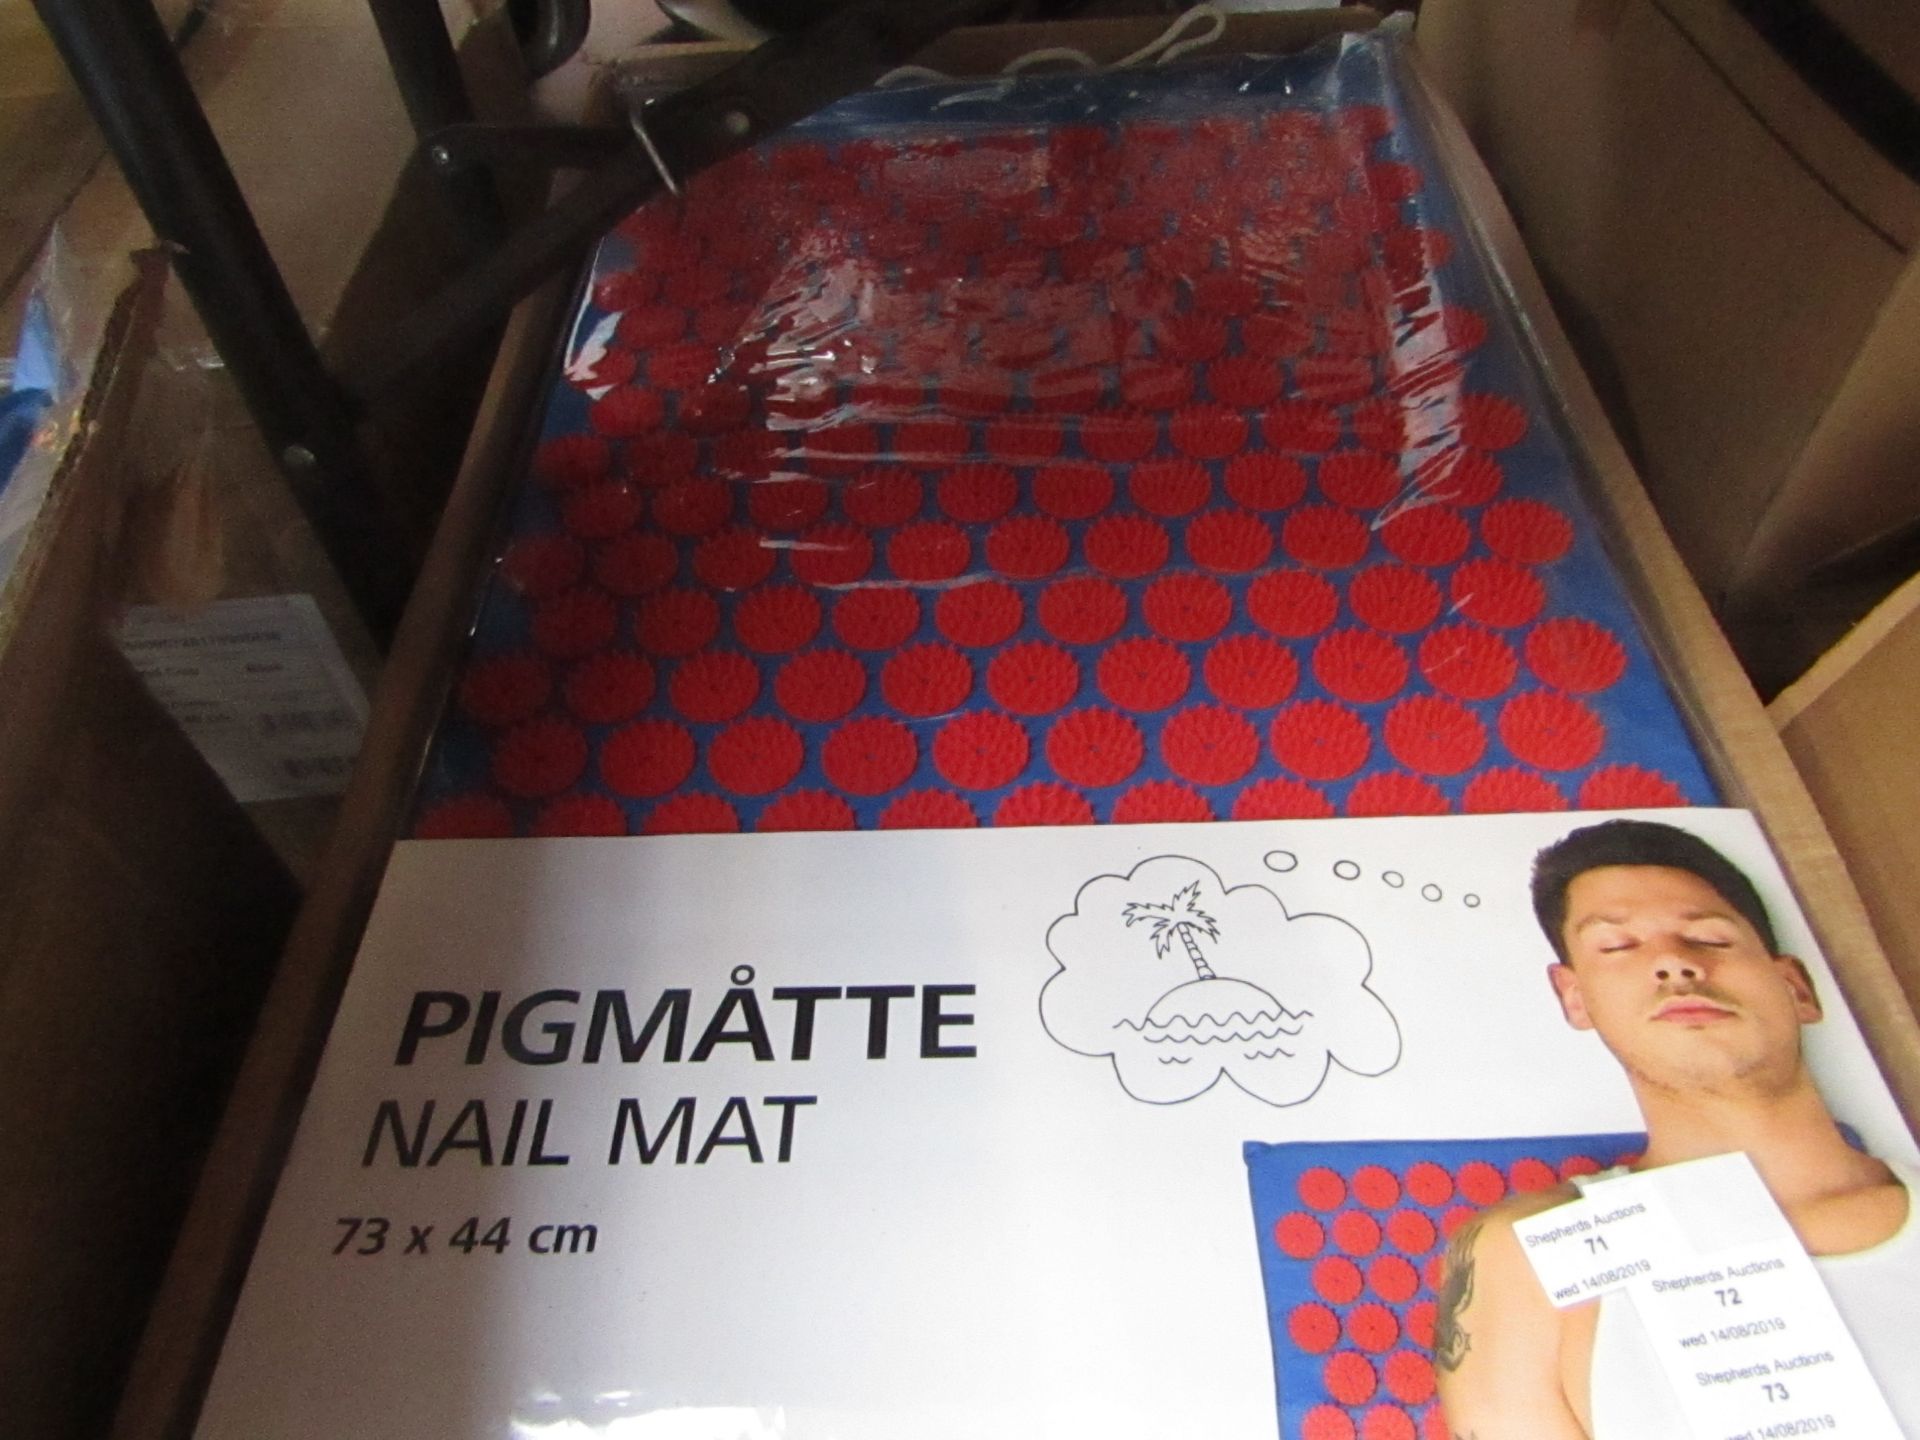 Tiger nail mat, 73 x 44cm, new and packaged.